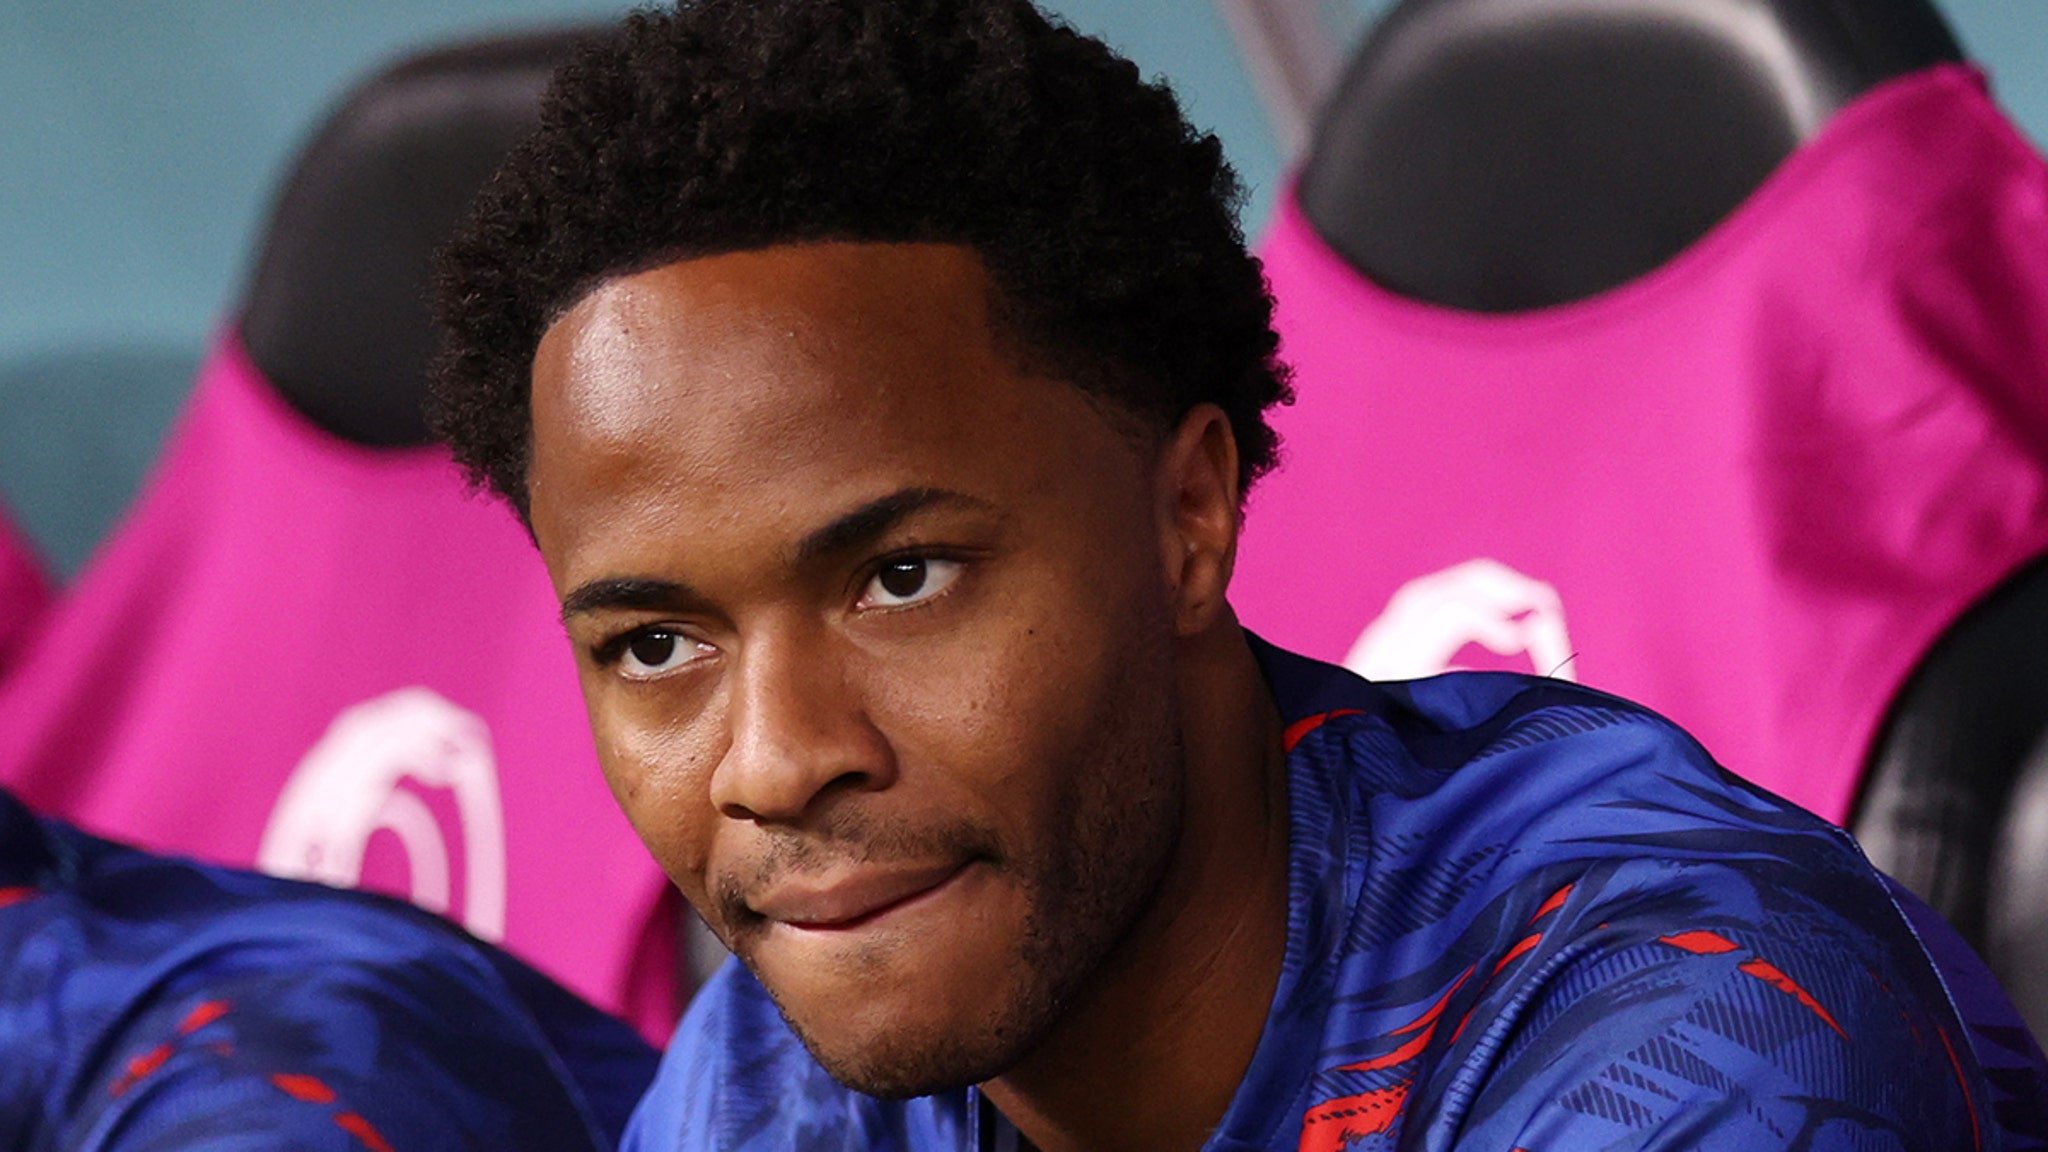 England's Raheem Sterling Leaves World Cup ... After Break-In At Family Home